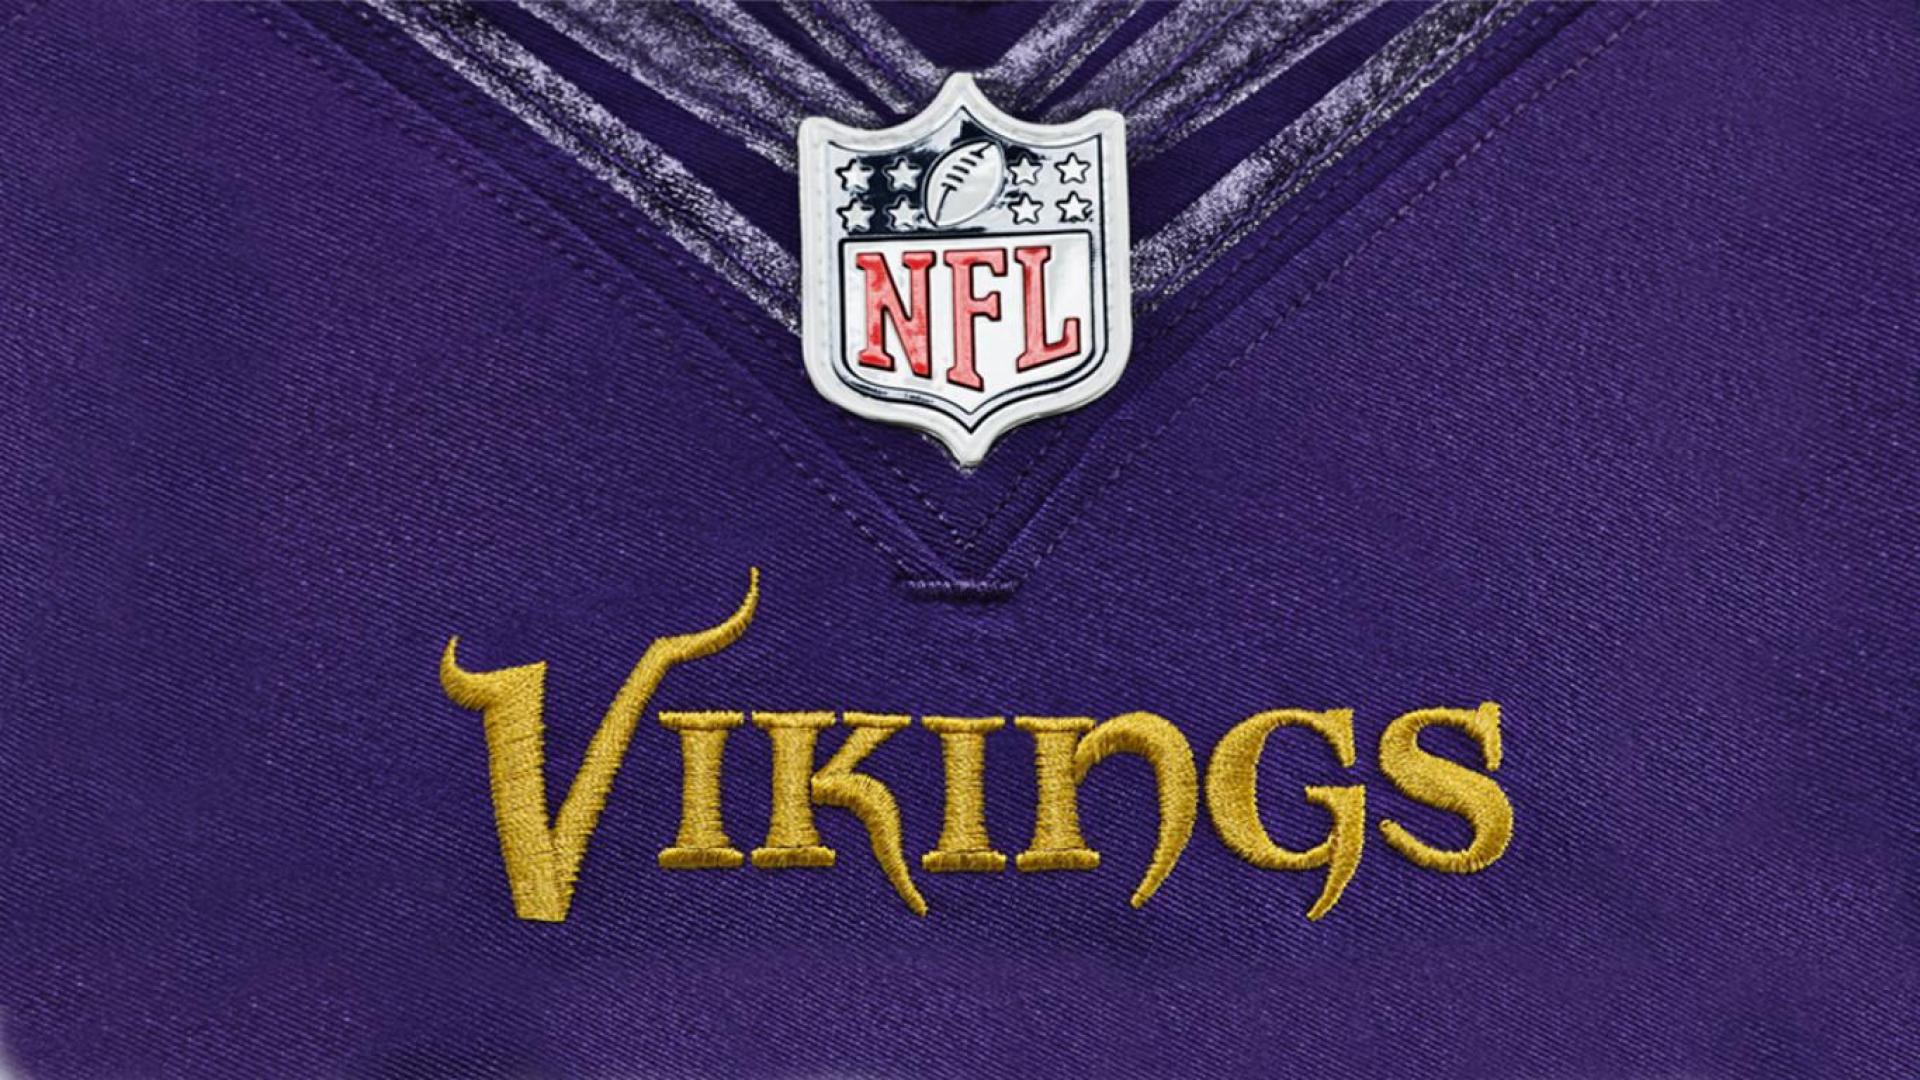 vikings jersey   123659   High Quality and Resolution Wallpapers 1920x1080